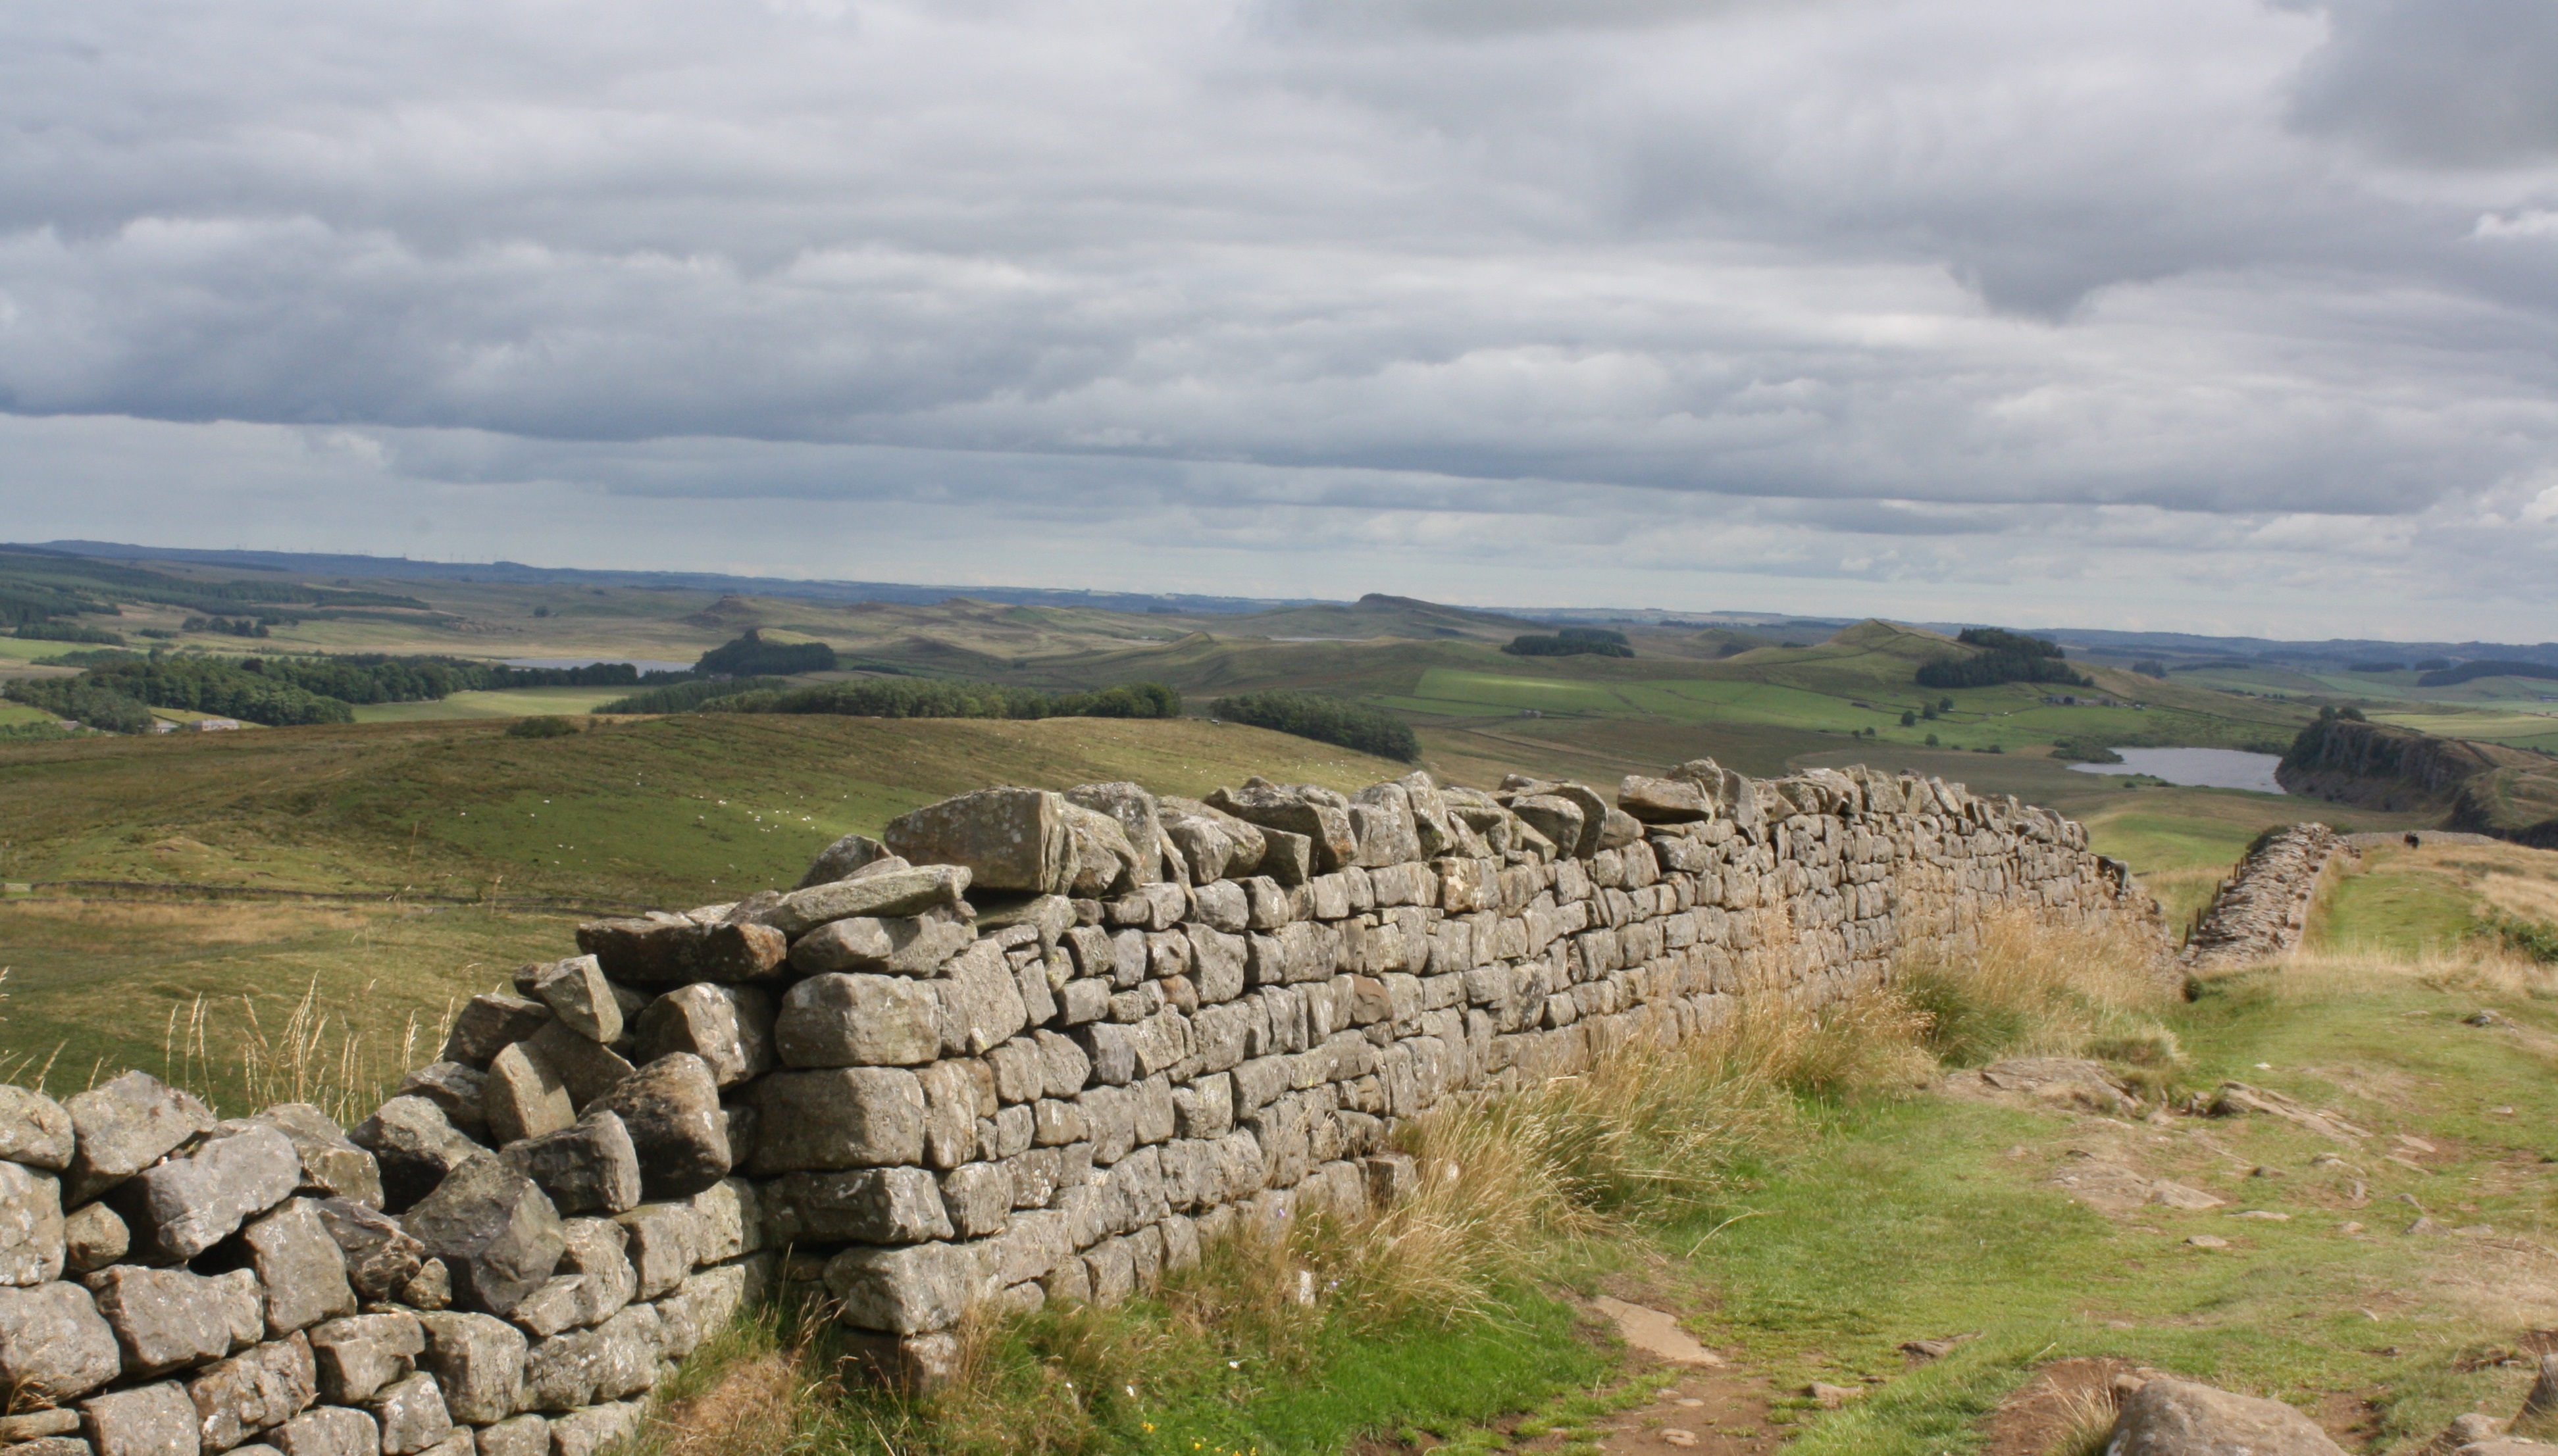 Hadrian's Wall and Crag Lough, August 2013, photo by Bruce E. Baker